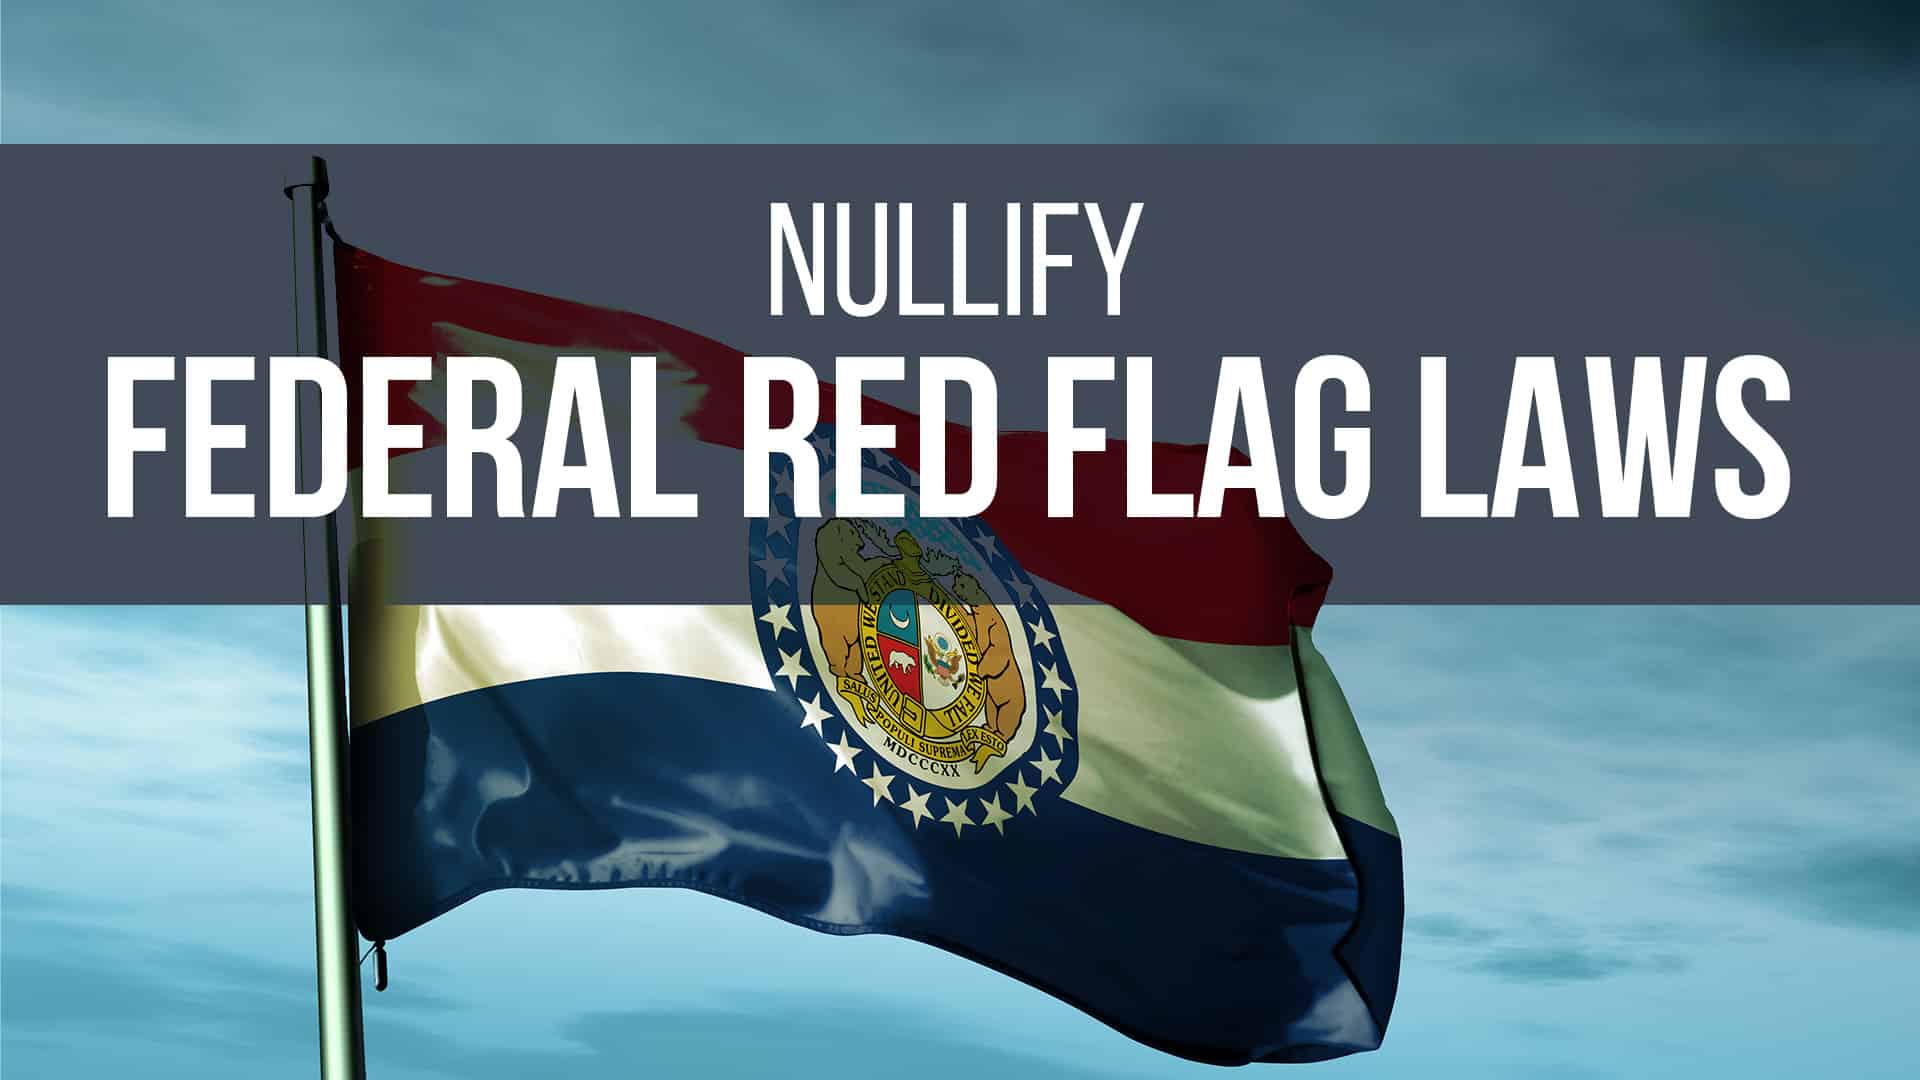 Missouri Bill Would Prohibit State Enforcement of Federal Red Flag Laws